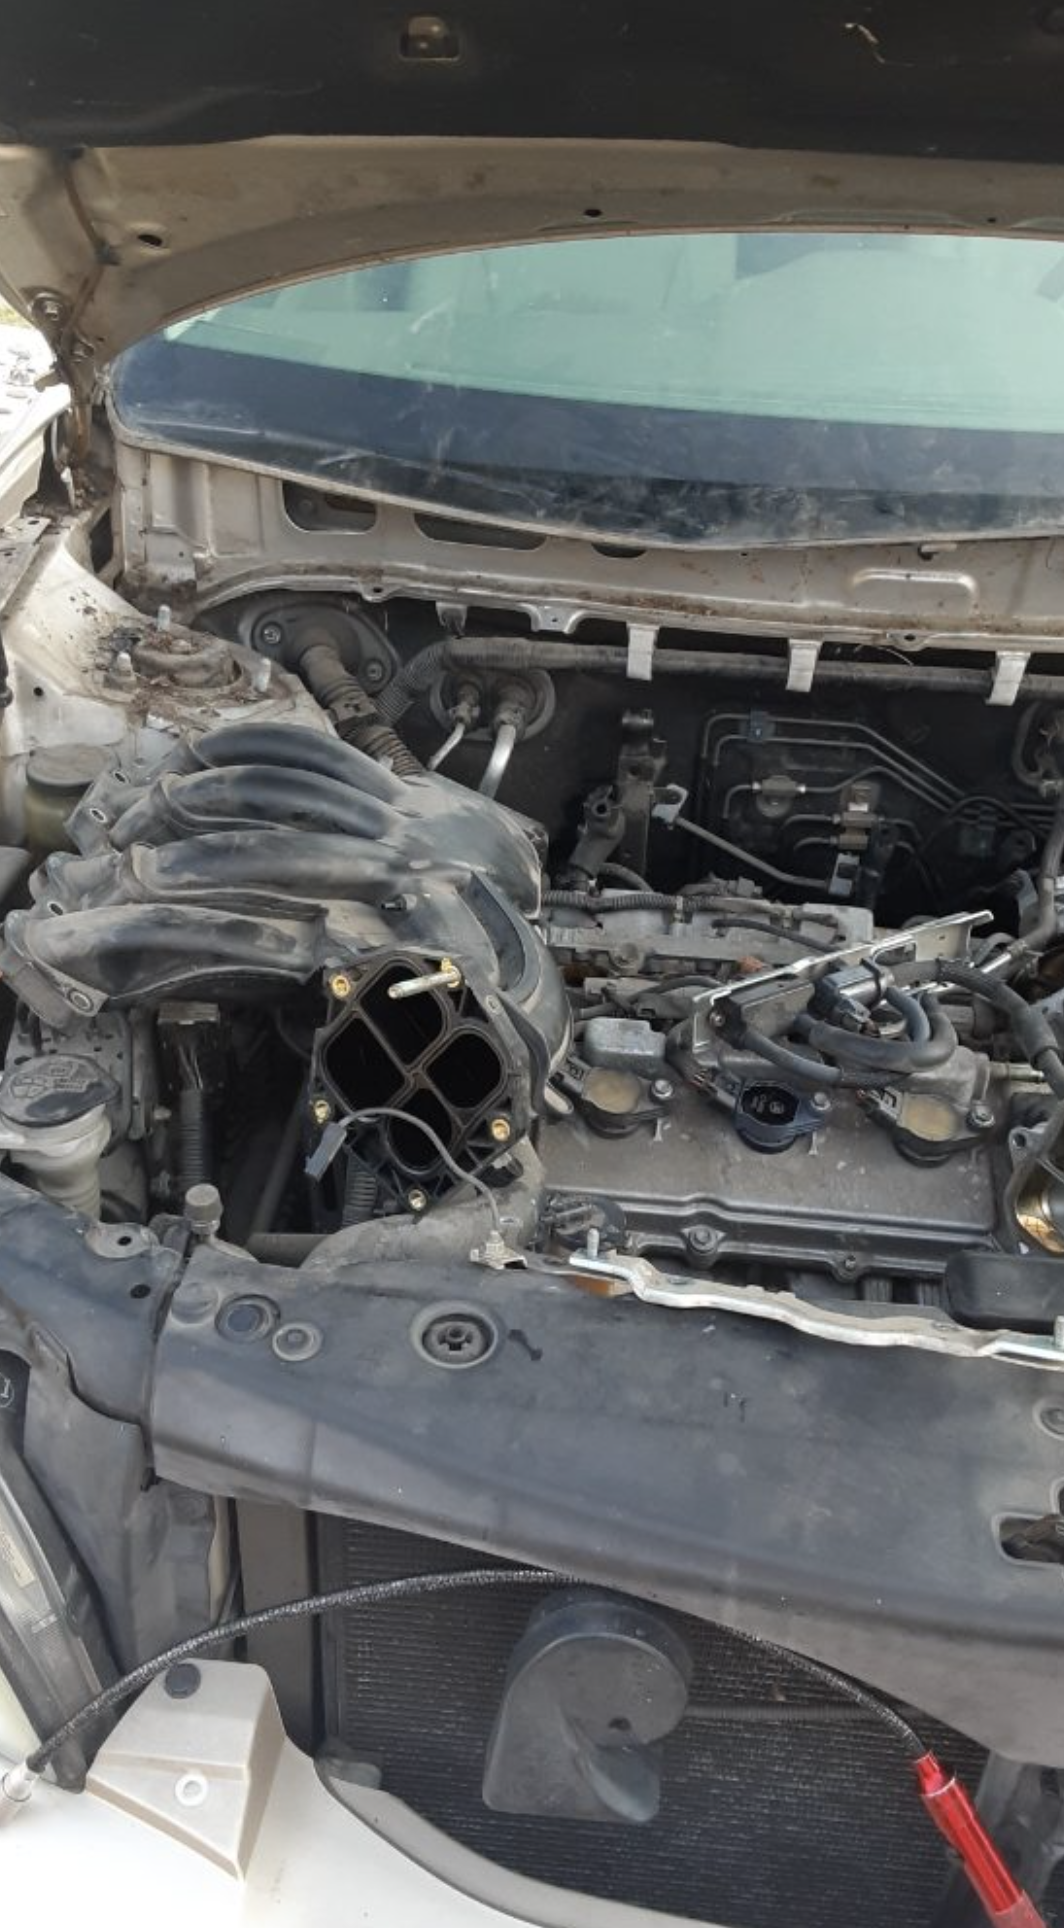 this image shows engine repair in Reno, NV